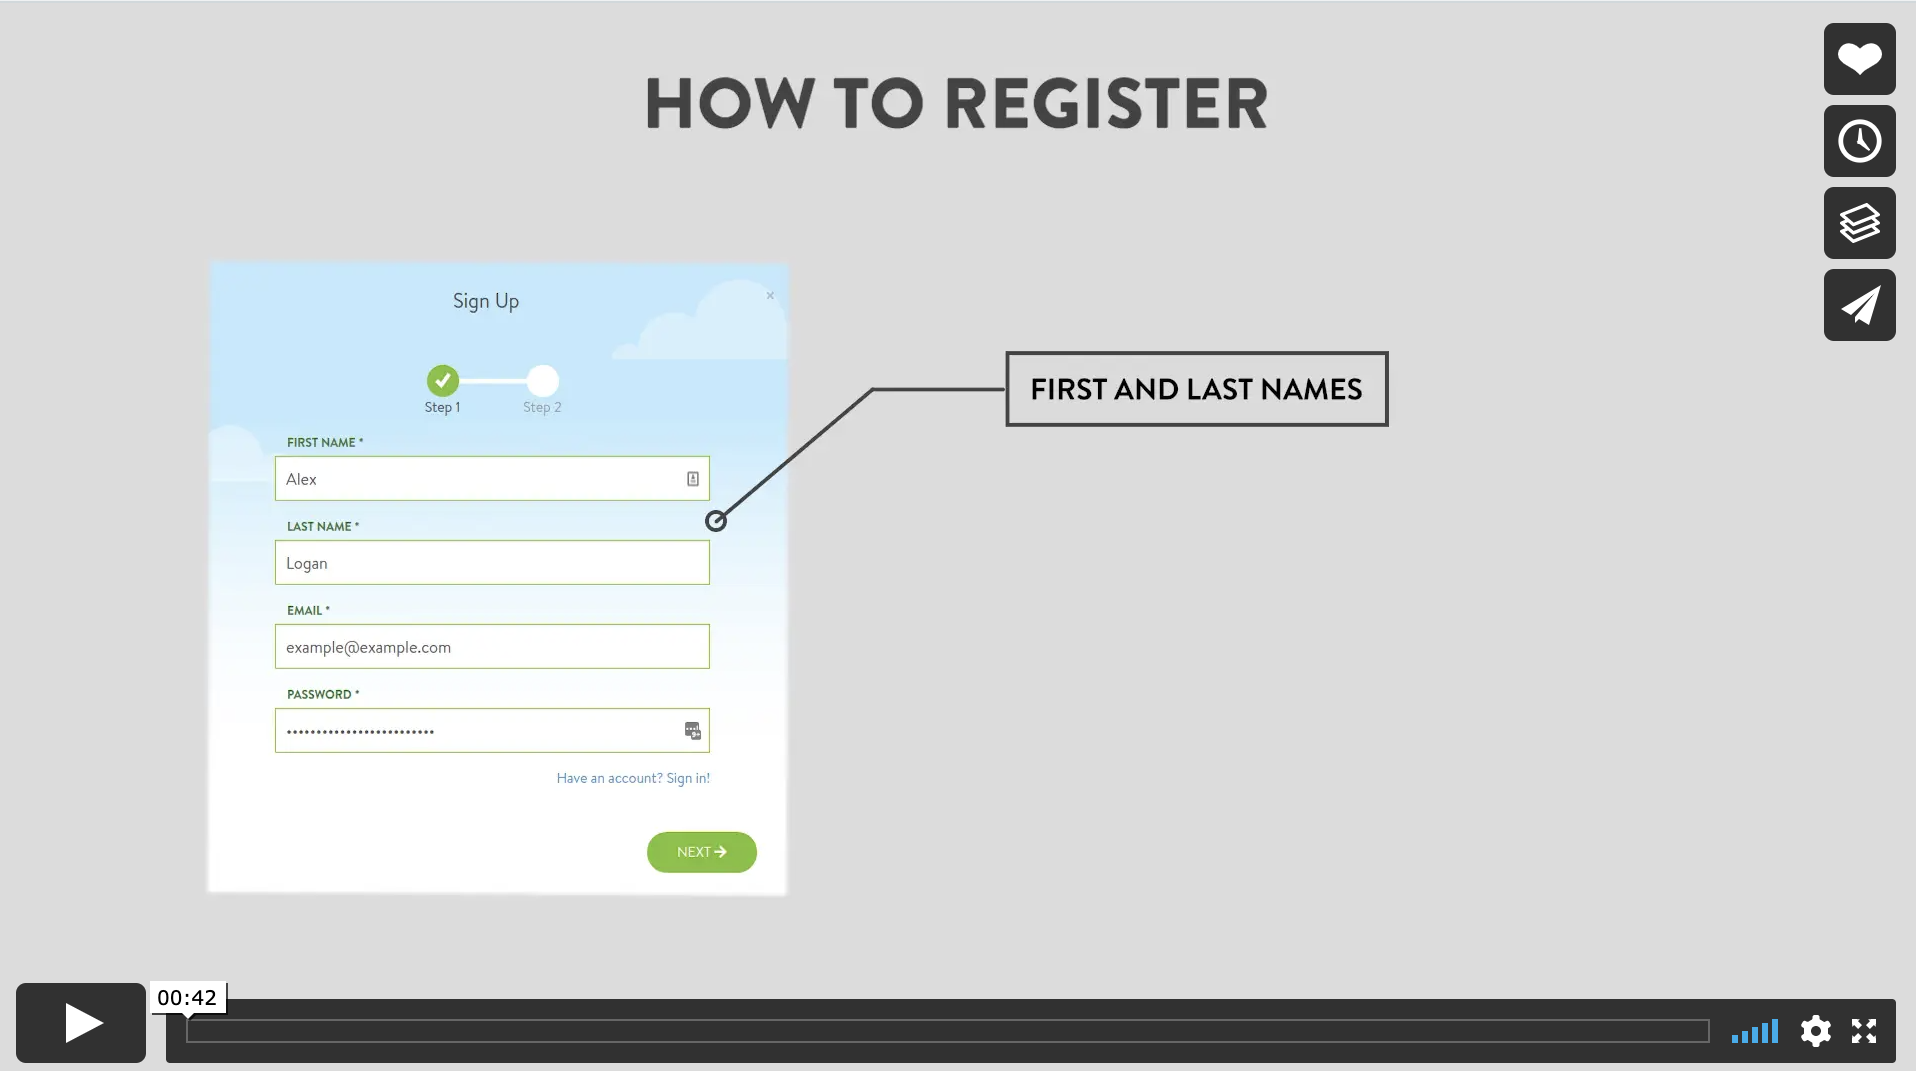 screenshot of "How to Register" video